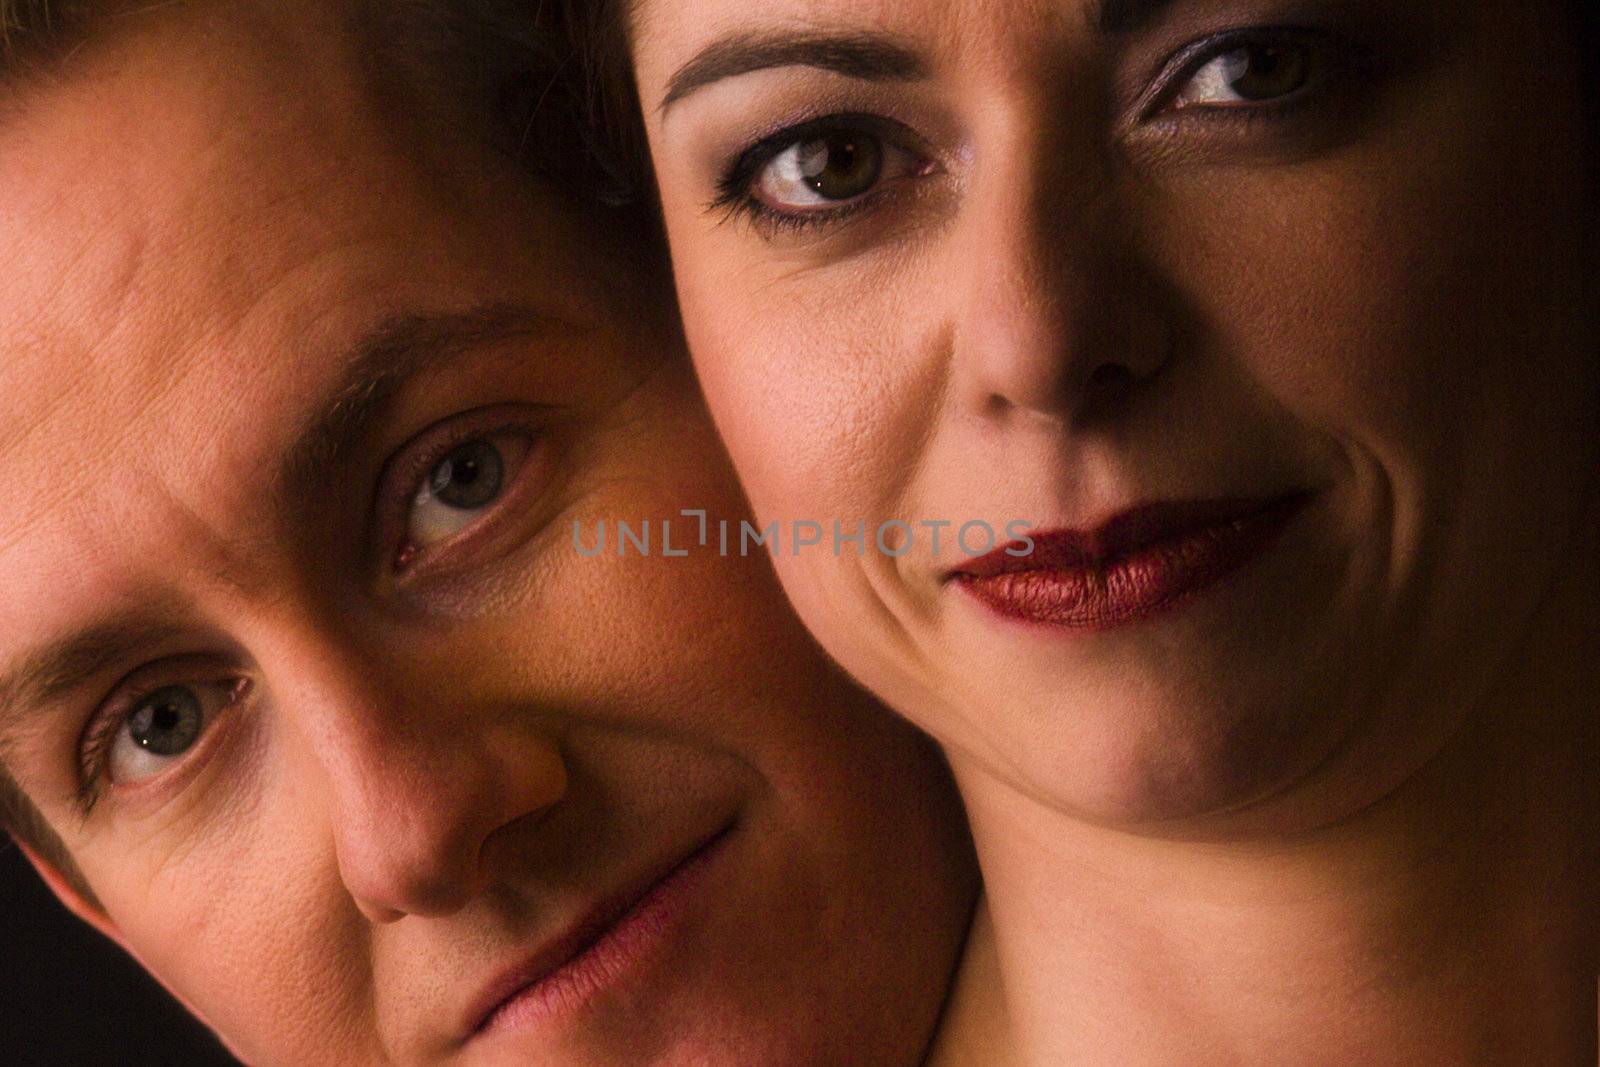 Married lovers portraits taken in the photo studio close up